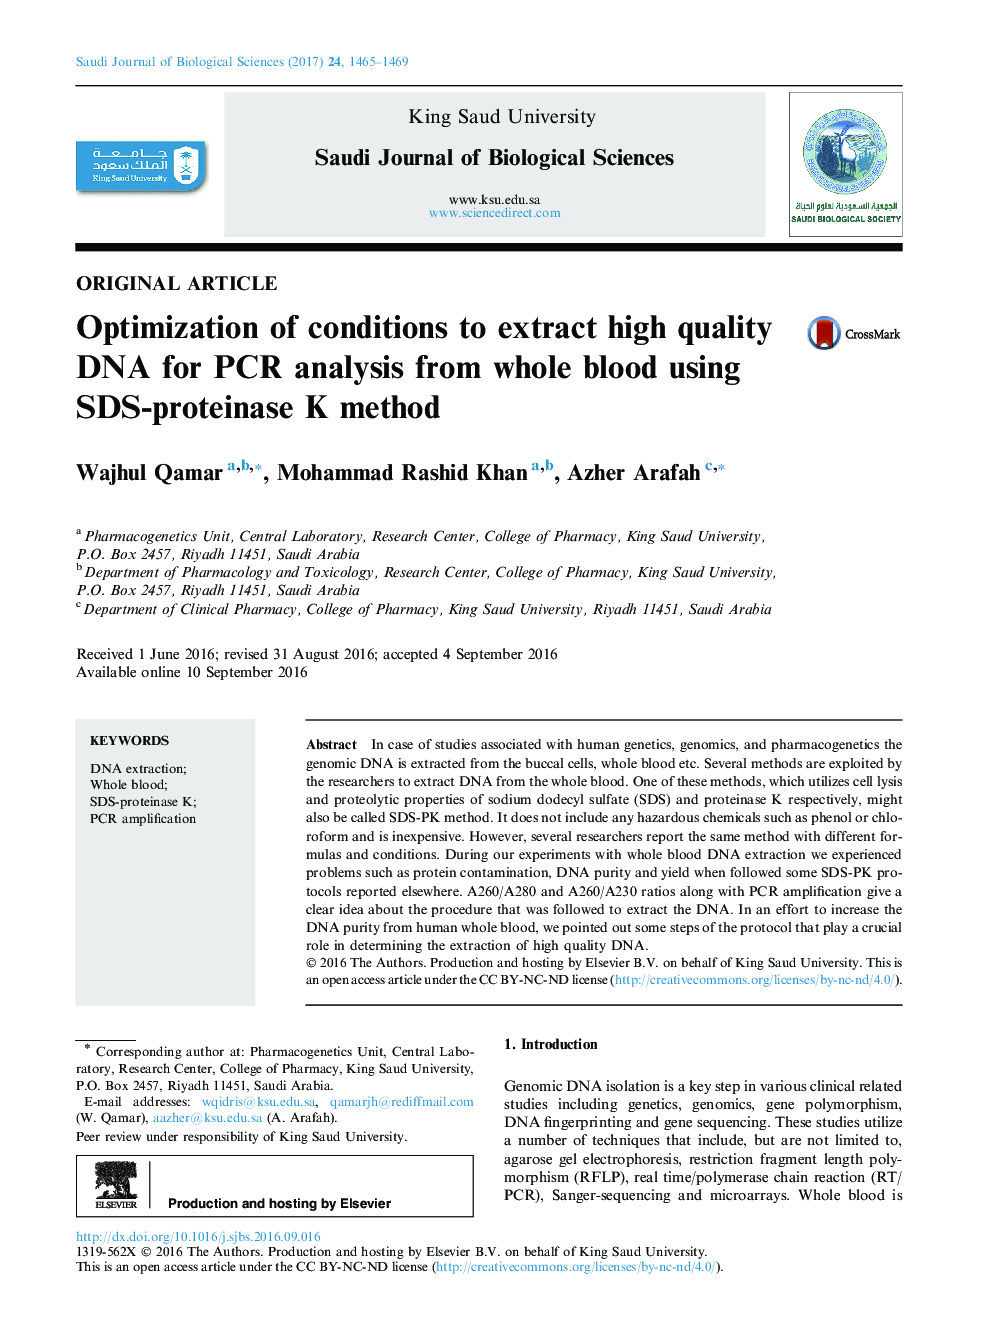 Original articleOptimization of conditions to extract high quality DNA for PCR analysis from whole blood using SDS-proteinase K method